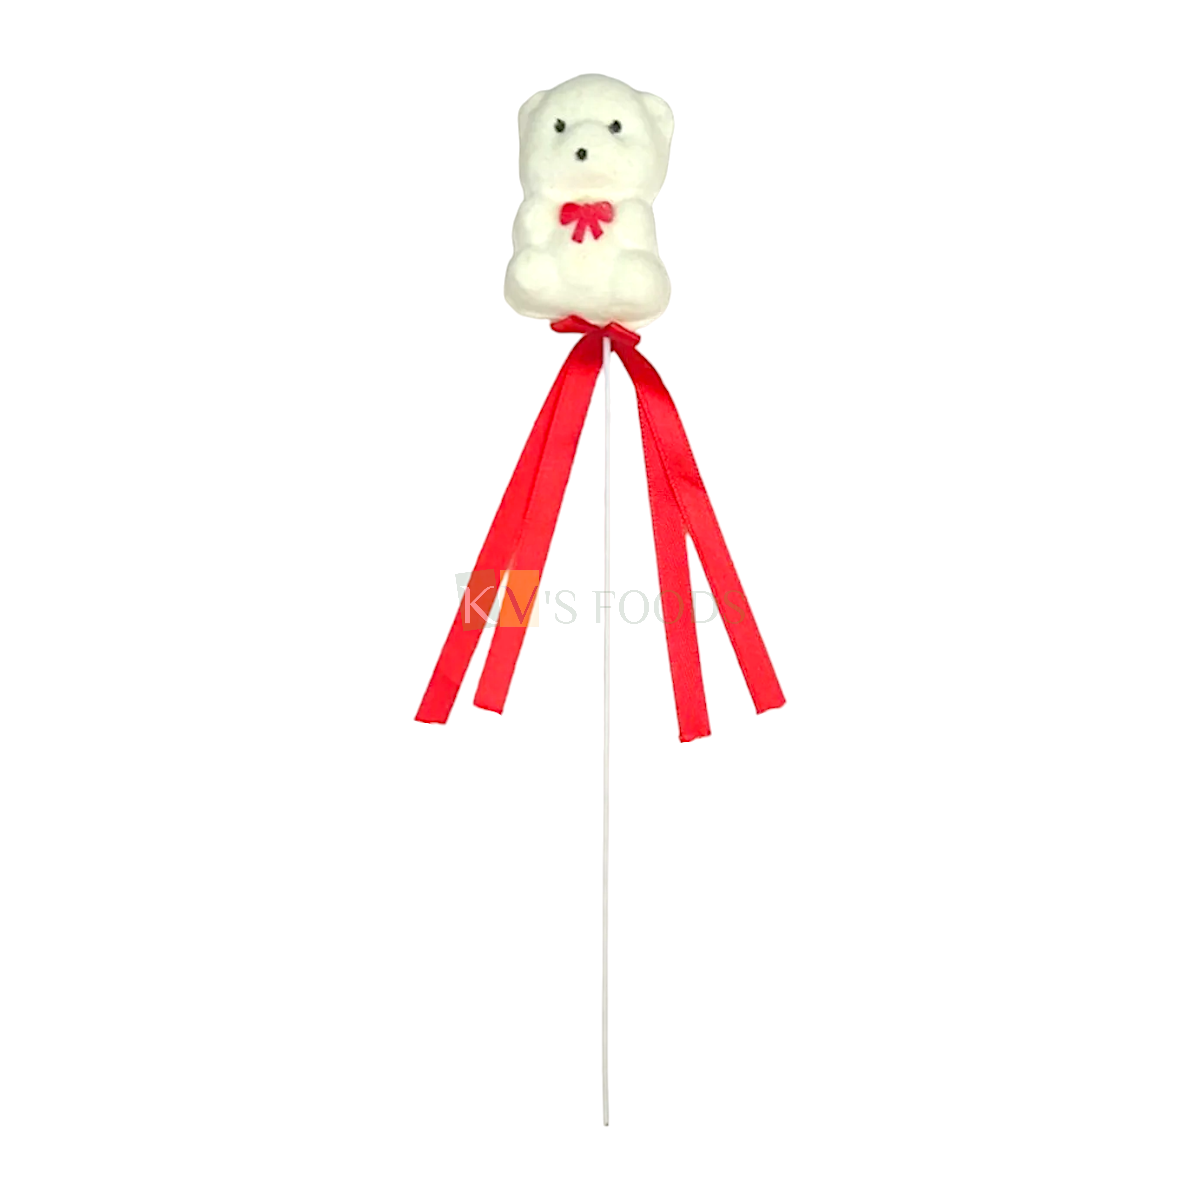 1PC White Small Teddy Bear with Red Satin Lace Knot Cake Topper Kids Girl Boys Happy Birthday Cake Insert Picks, Romantic Love Valentine Theme Bouquet Fillers, Teaddy Bear Stick DIY Cake Decorations